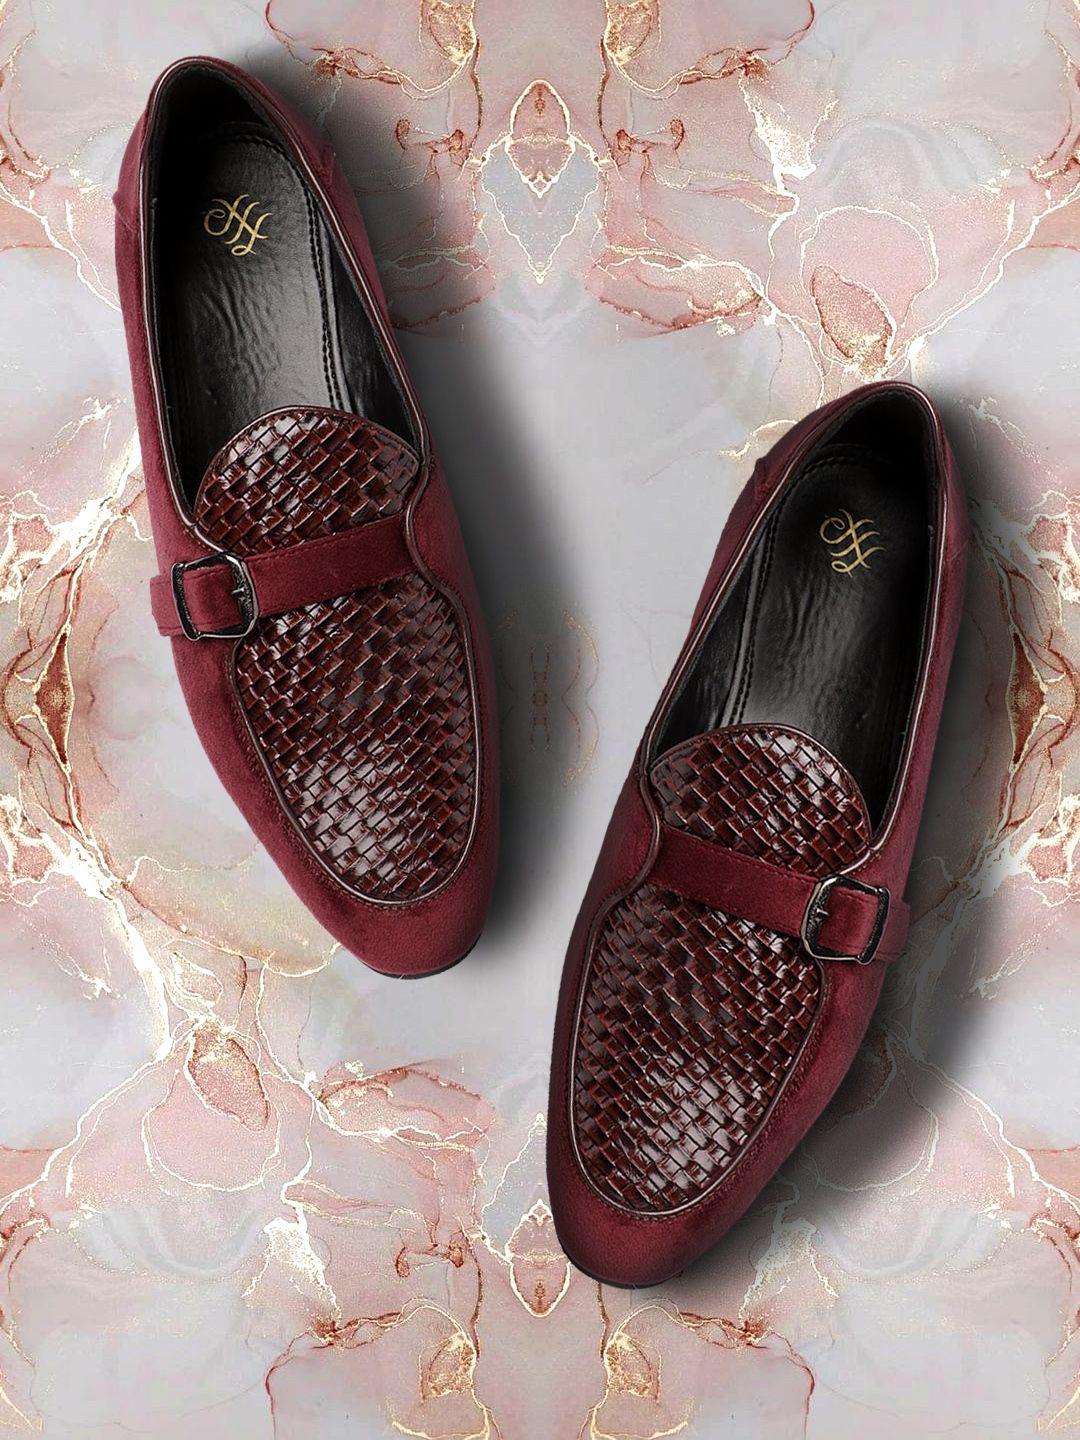 house-of-pataudi-men-burgundy-&-brown-basketweave-textured-handcrafted-leather-loafers